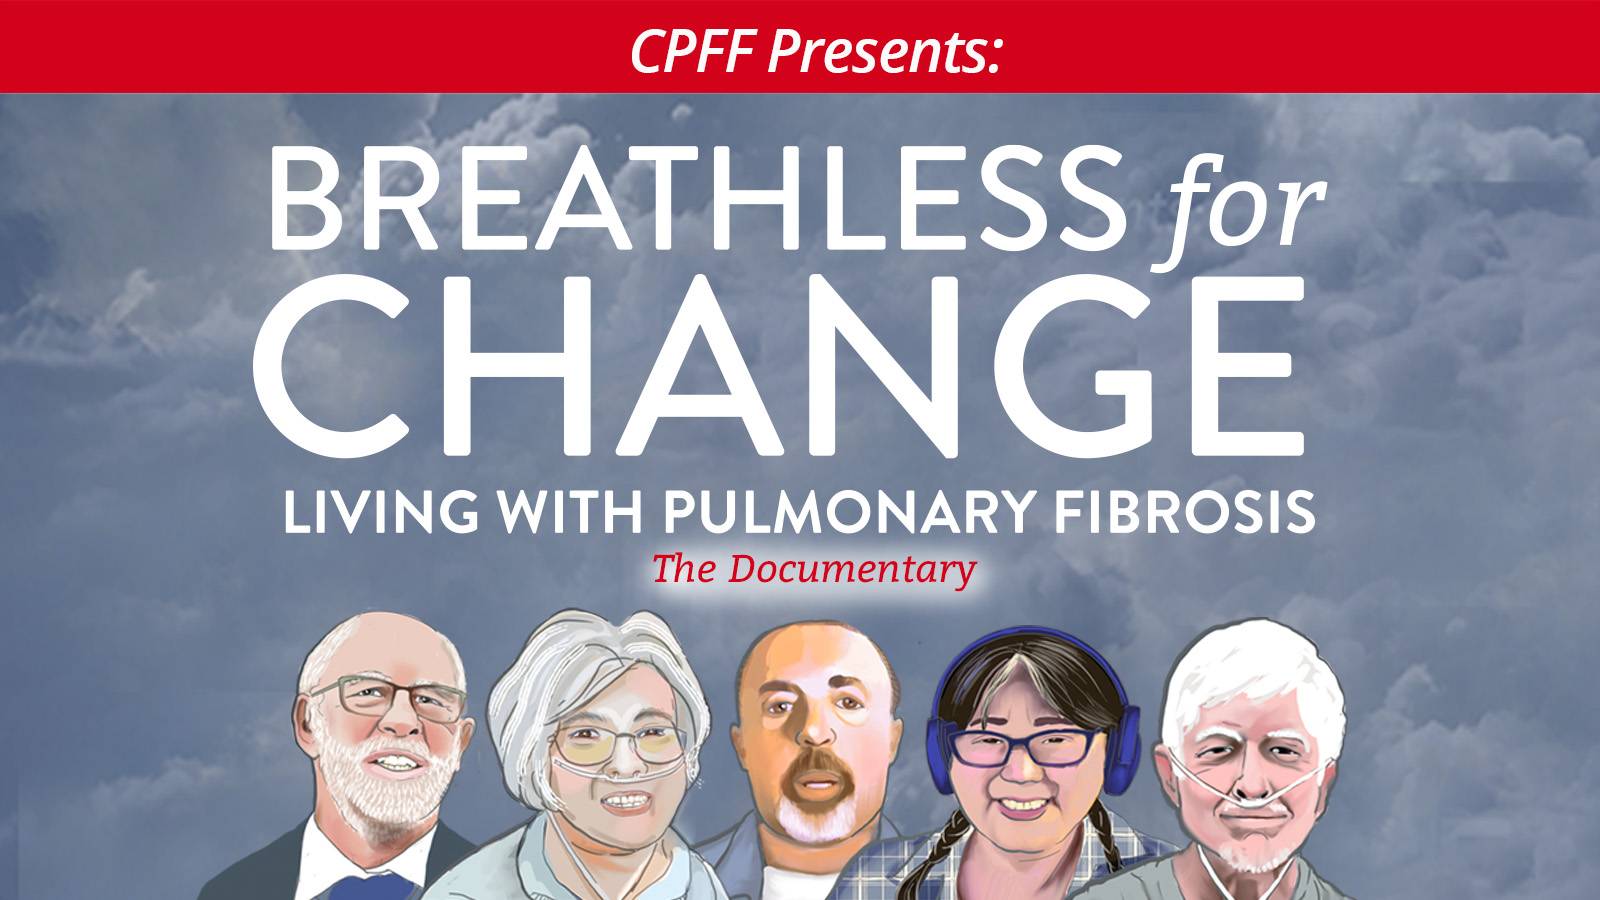 CPFF Presents Documentary